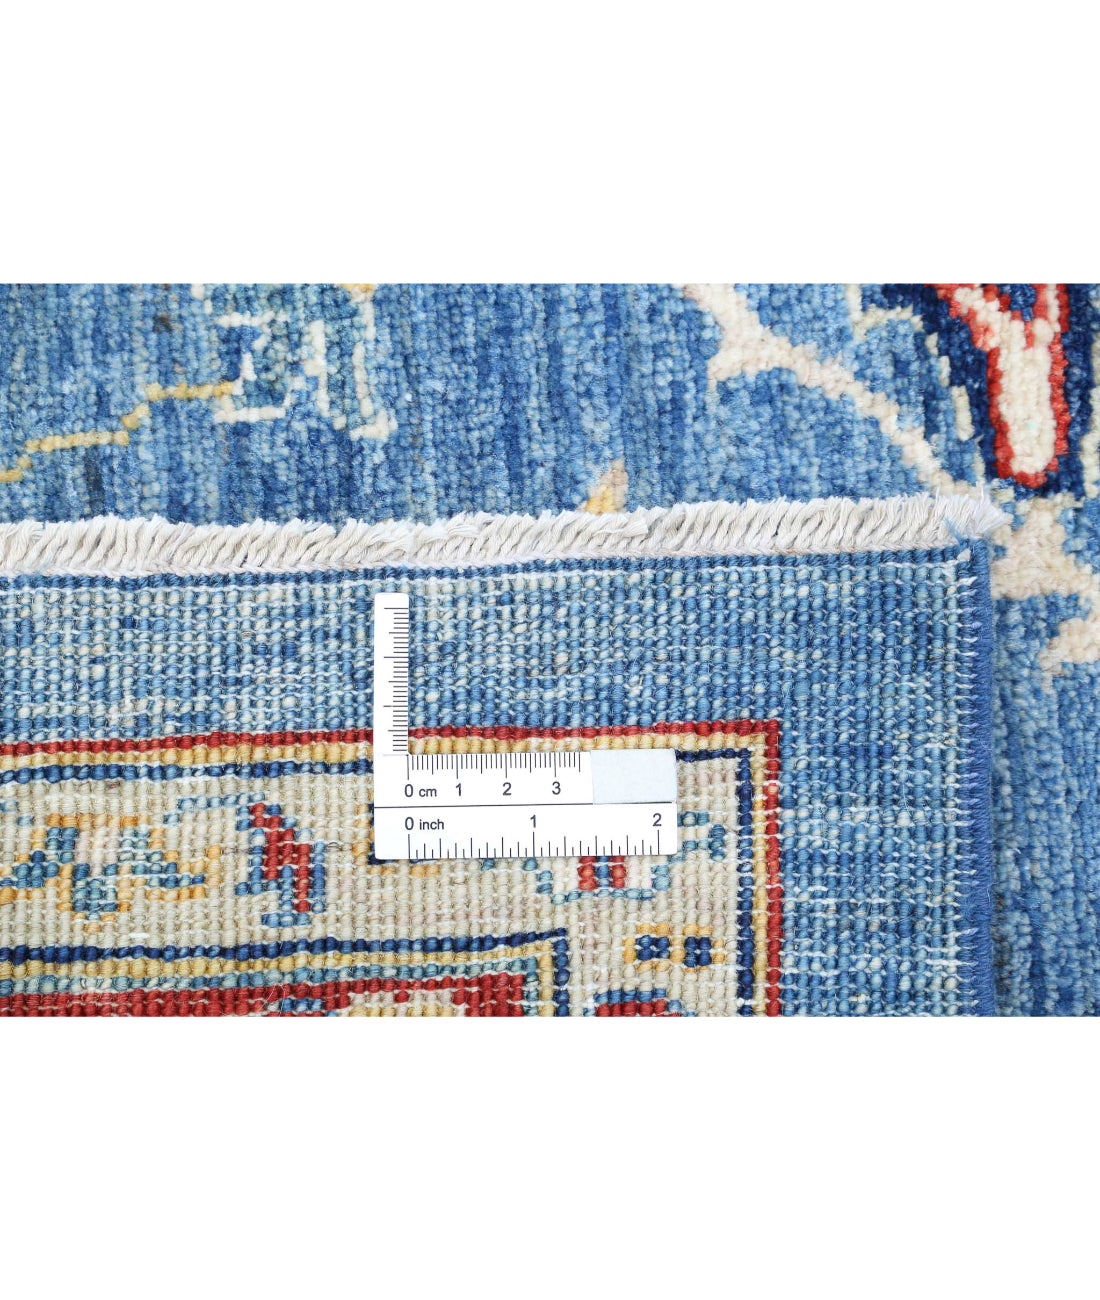 Ziegler 8'11'' X 11'10'' Hand-Knotted Wool Rug 8'11'' x 11'10'' (268 X 355) / Blue / Red